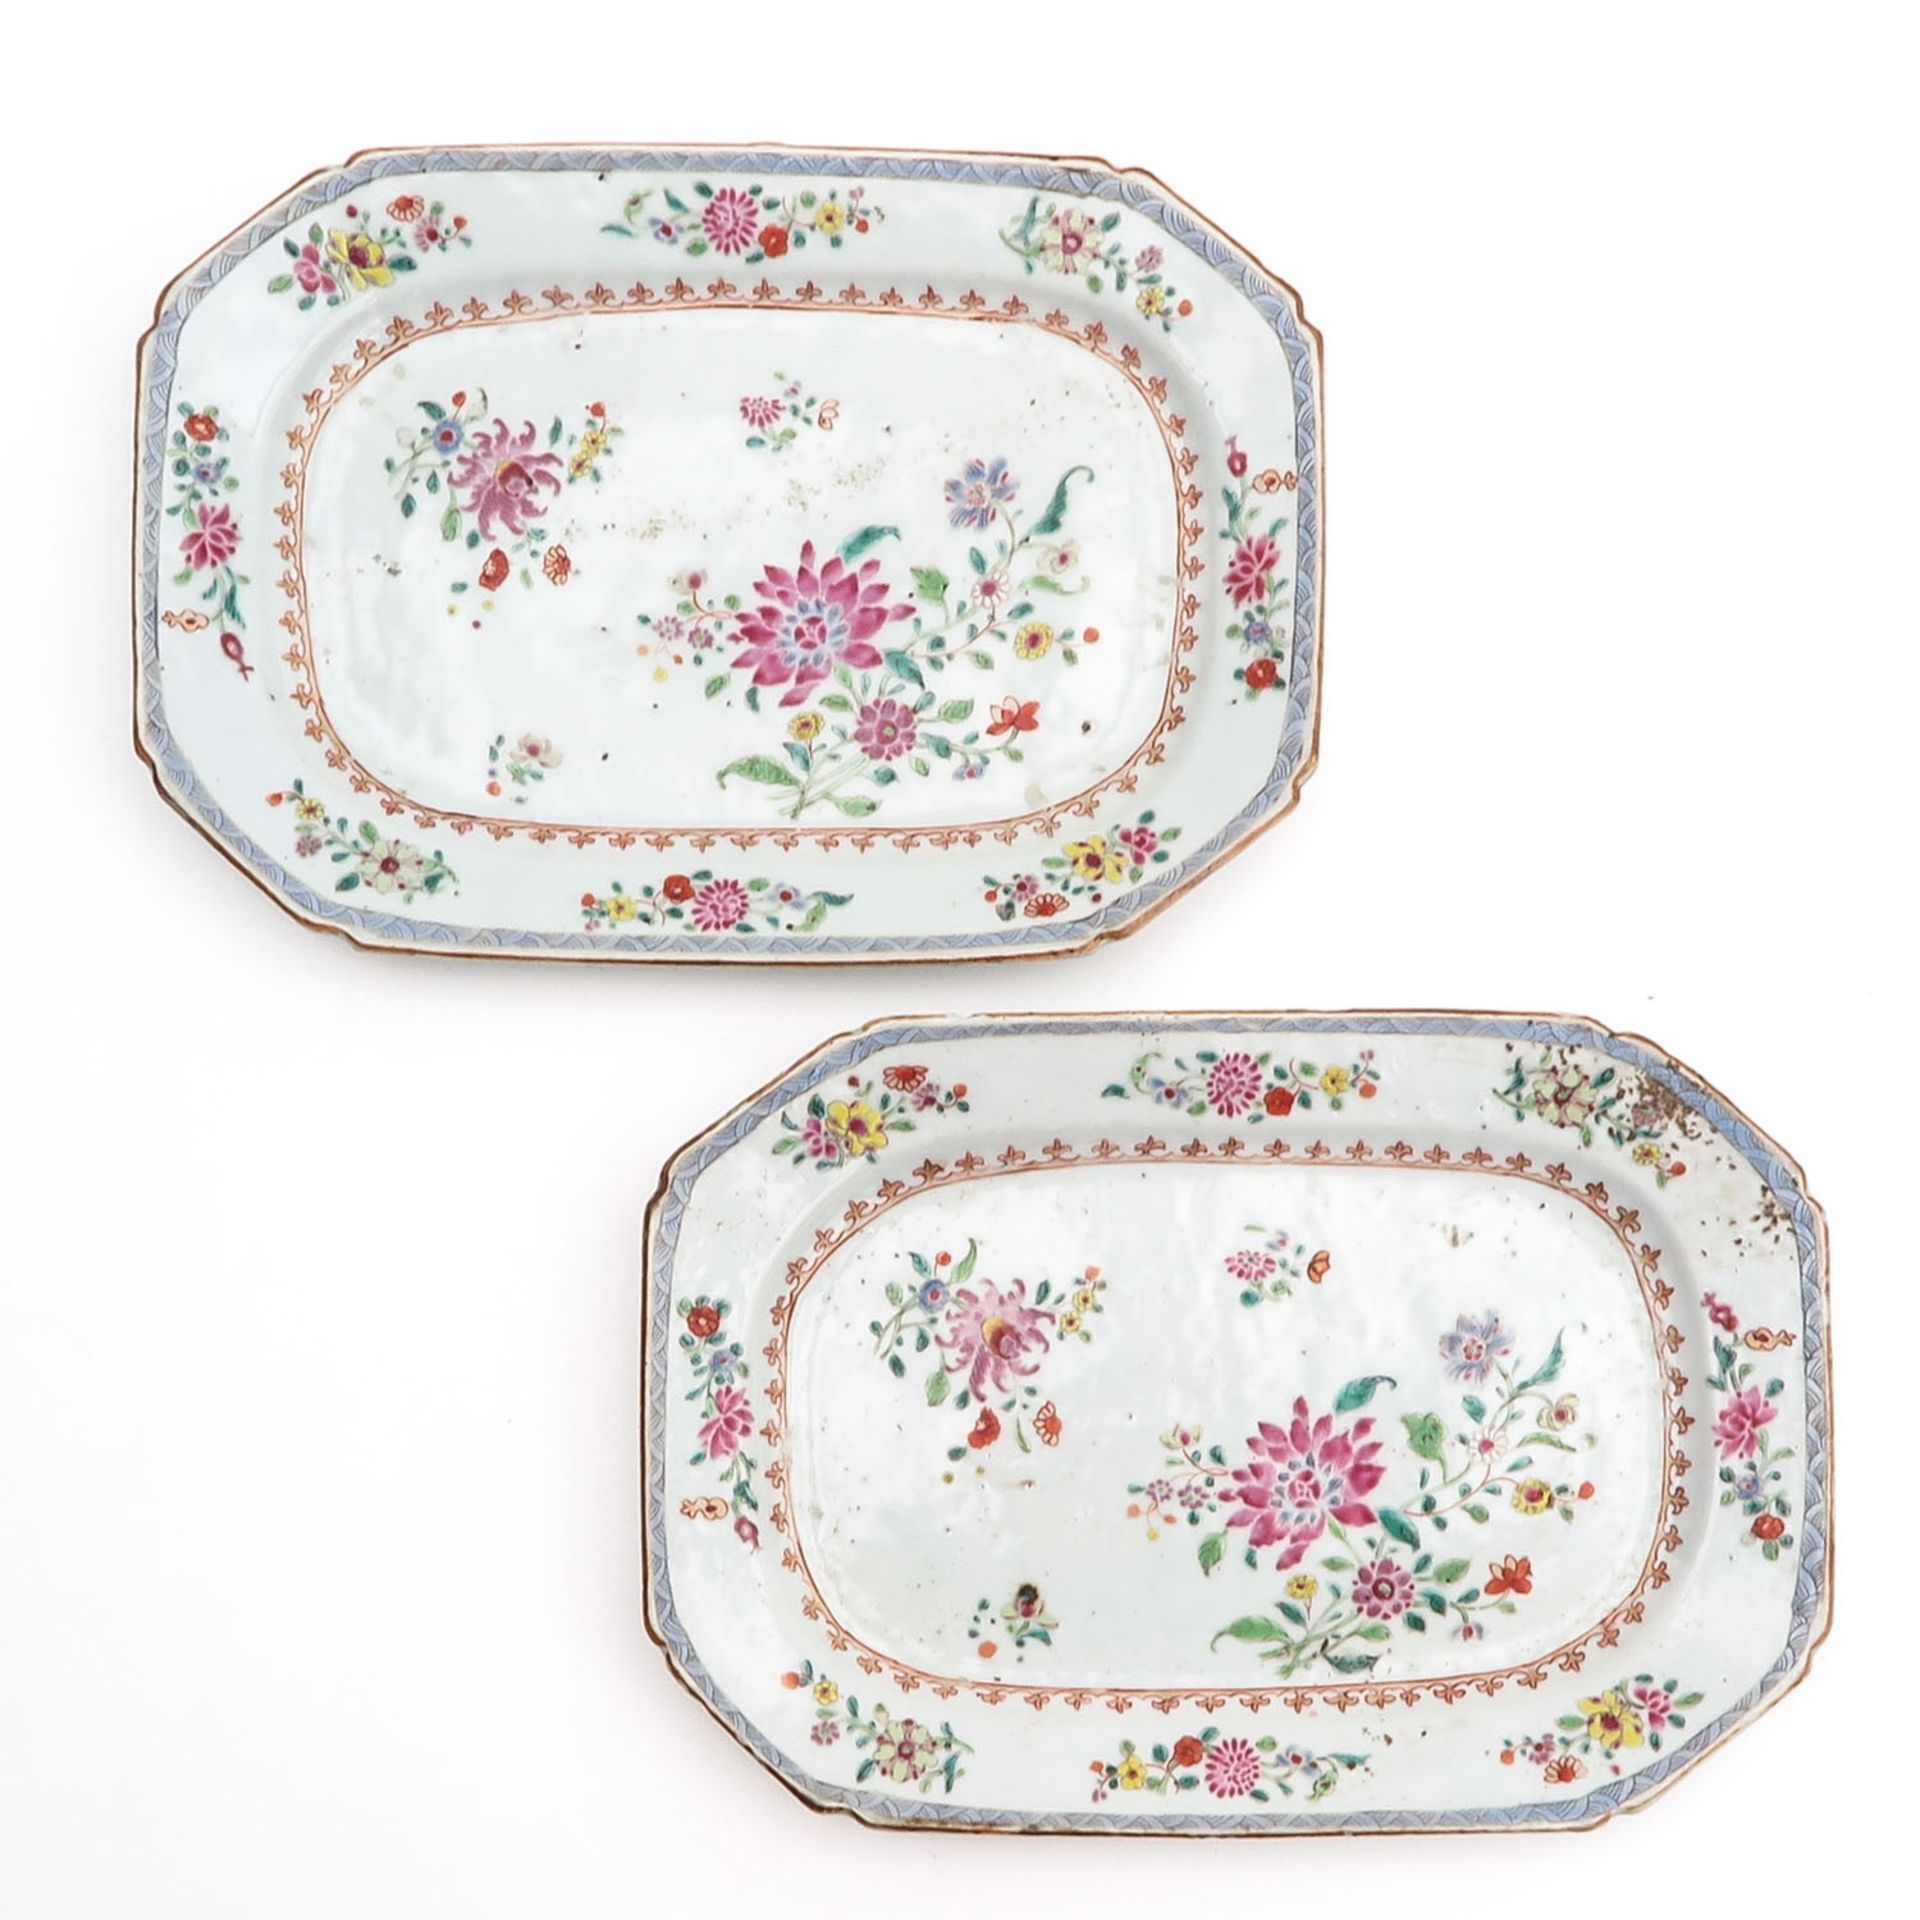 A Pair of Famille Rose Serving Trays